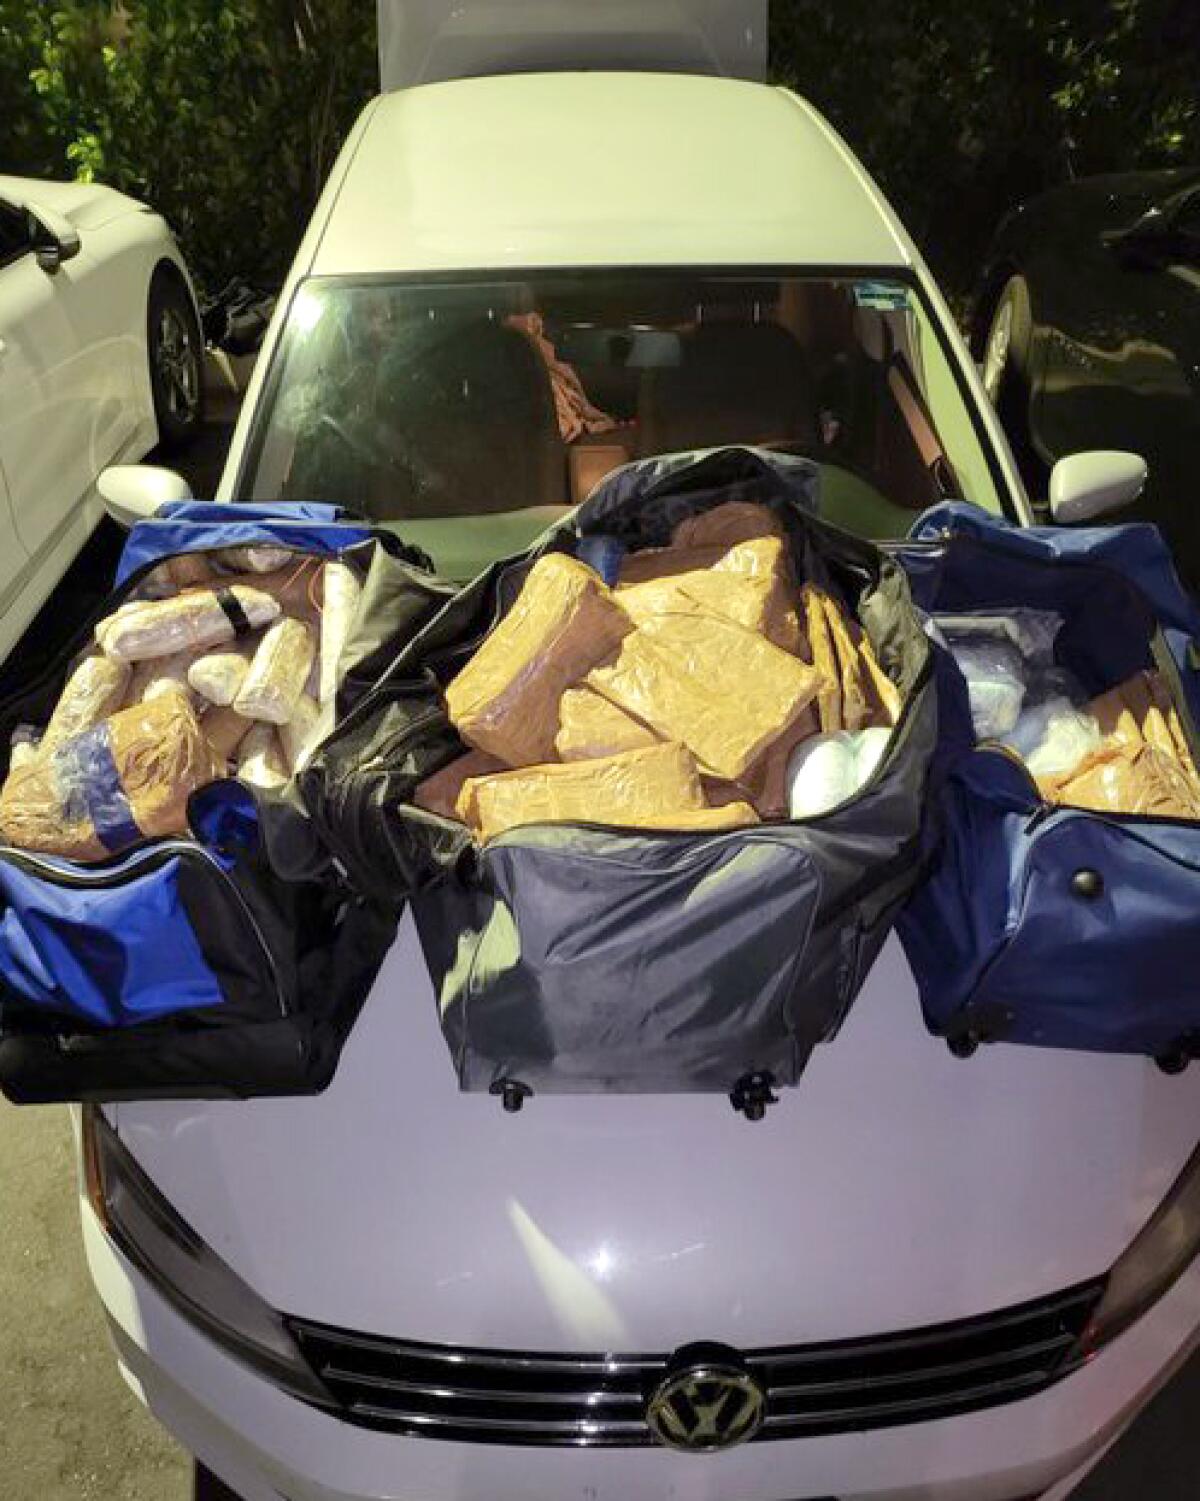 Three large duffel bags sit on the front hood of a Volkswagen Jetta